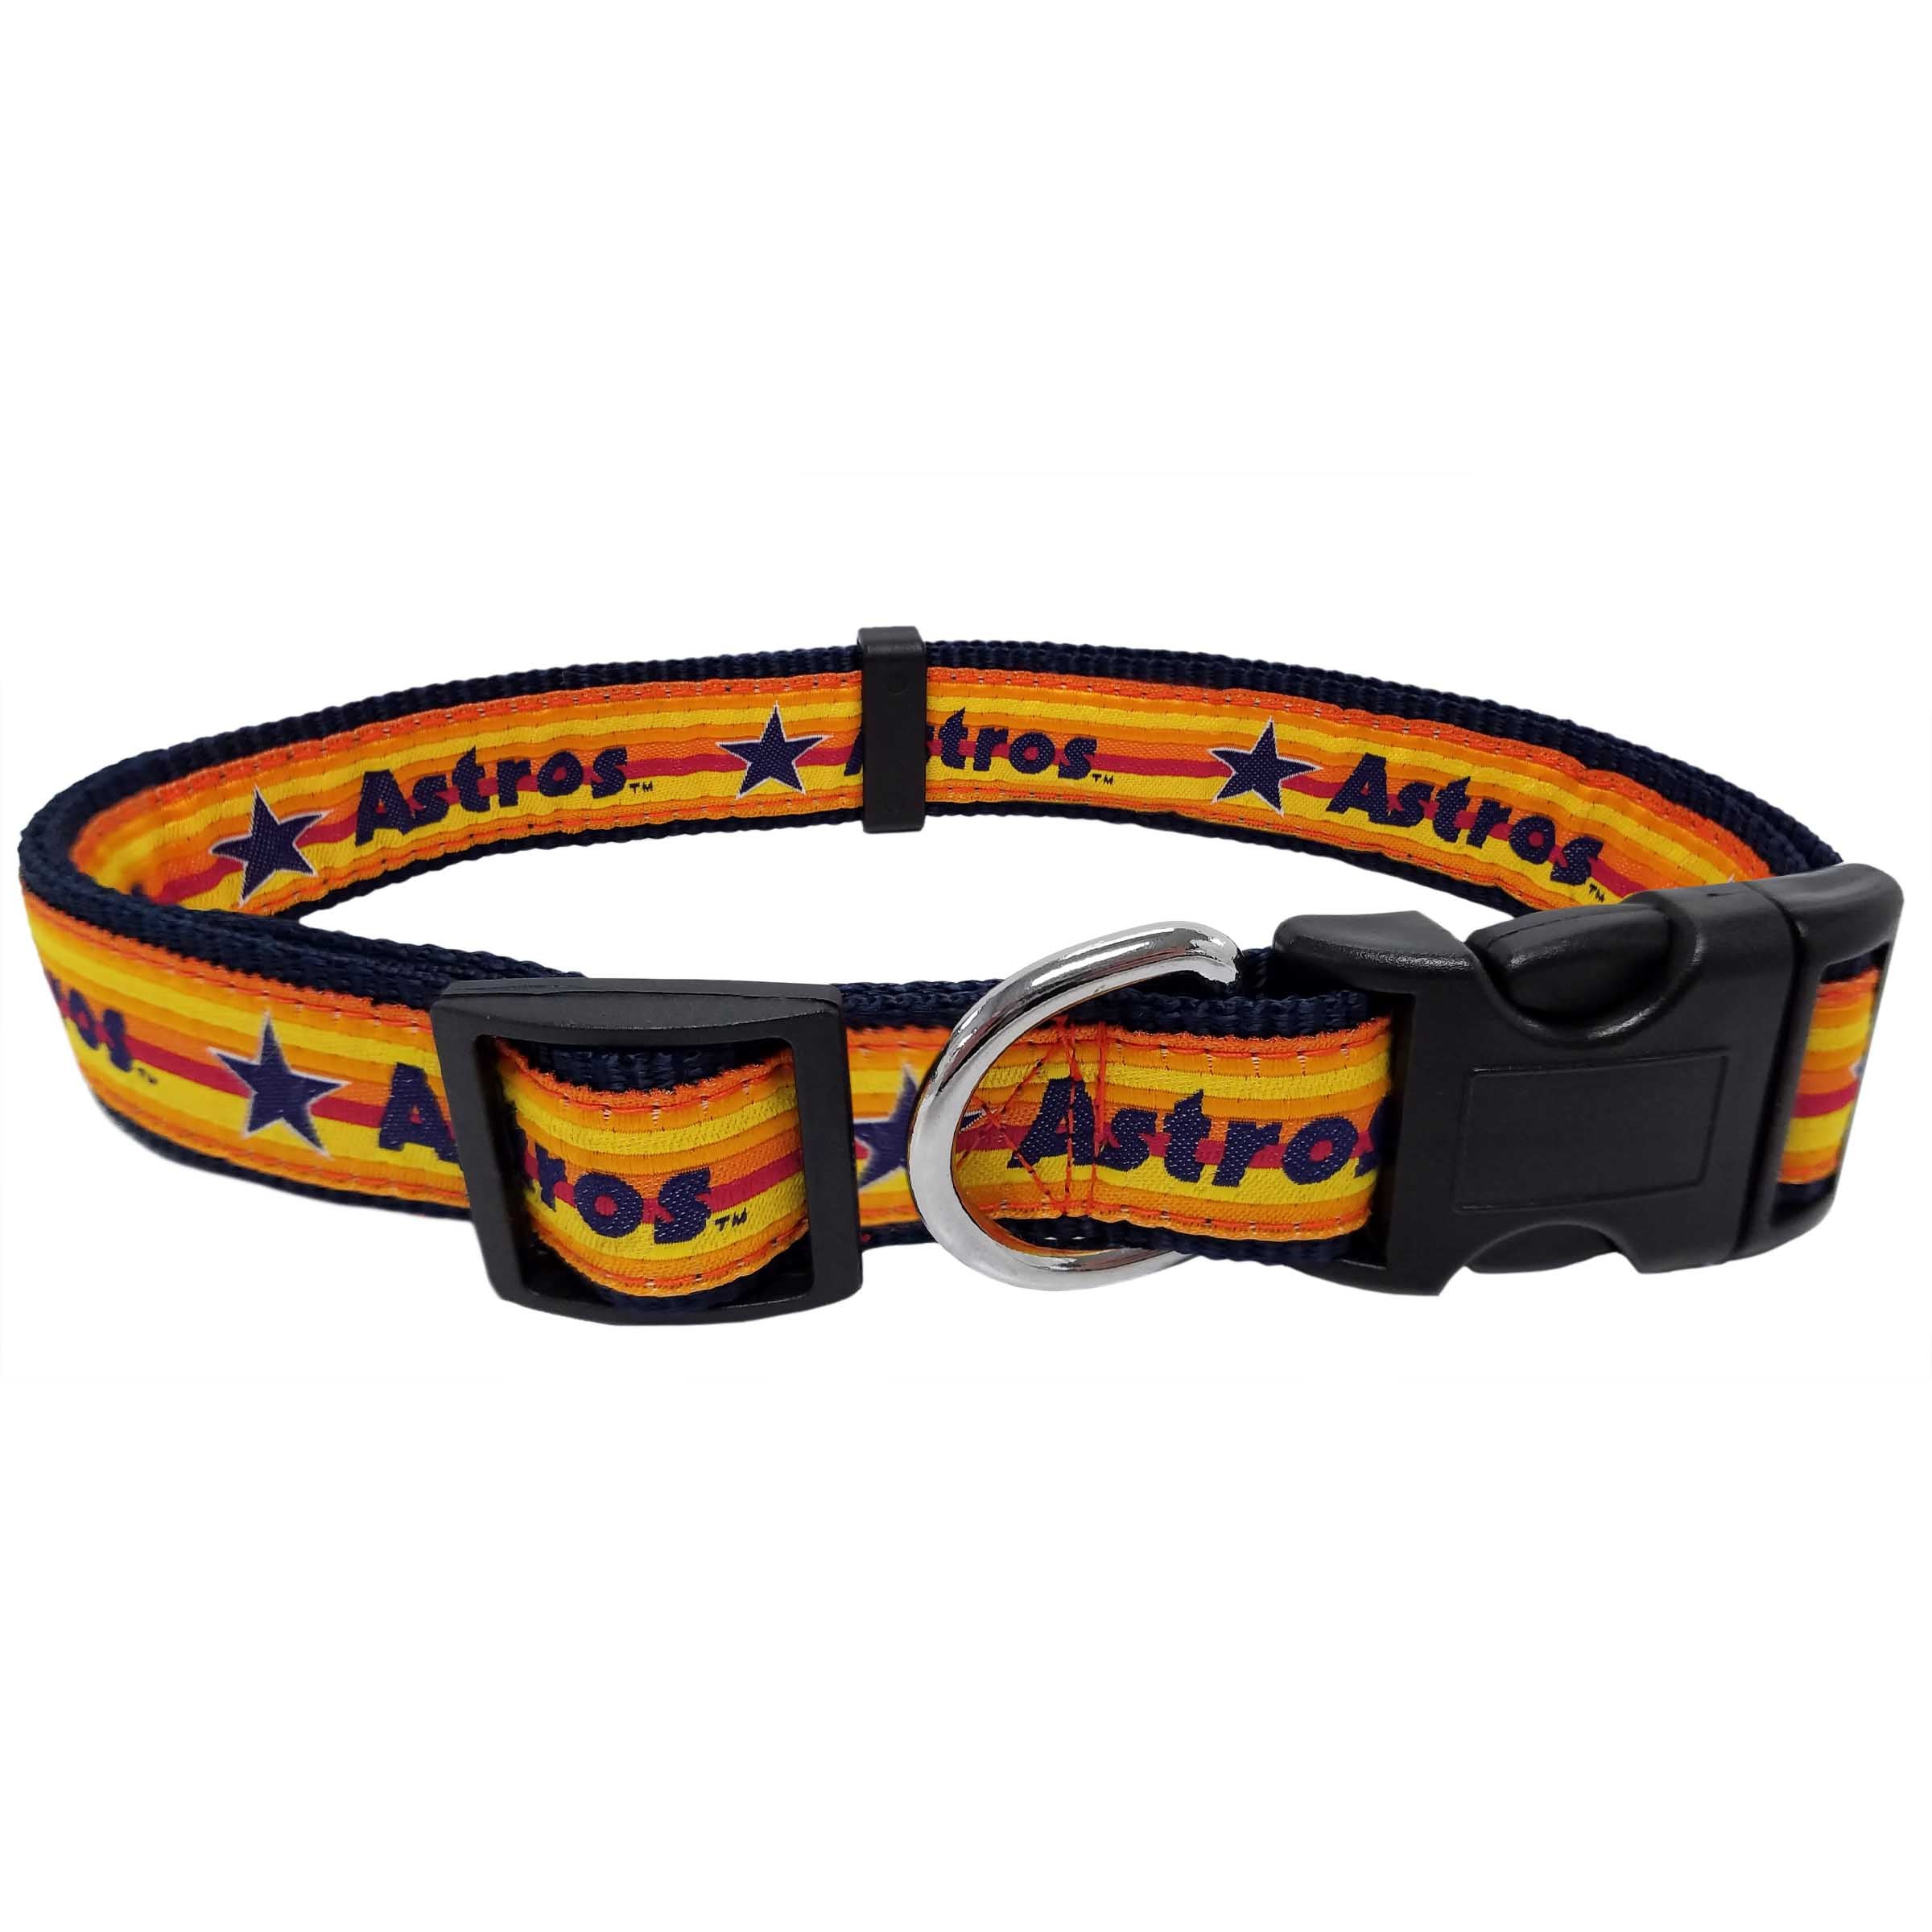 Houston Astros Rainbow Pet Harness by Pets First